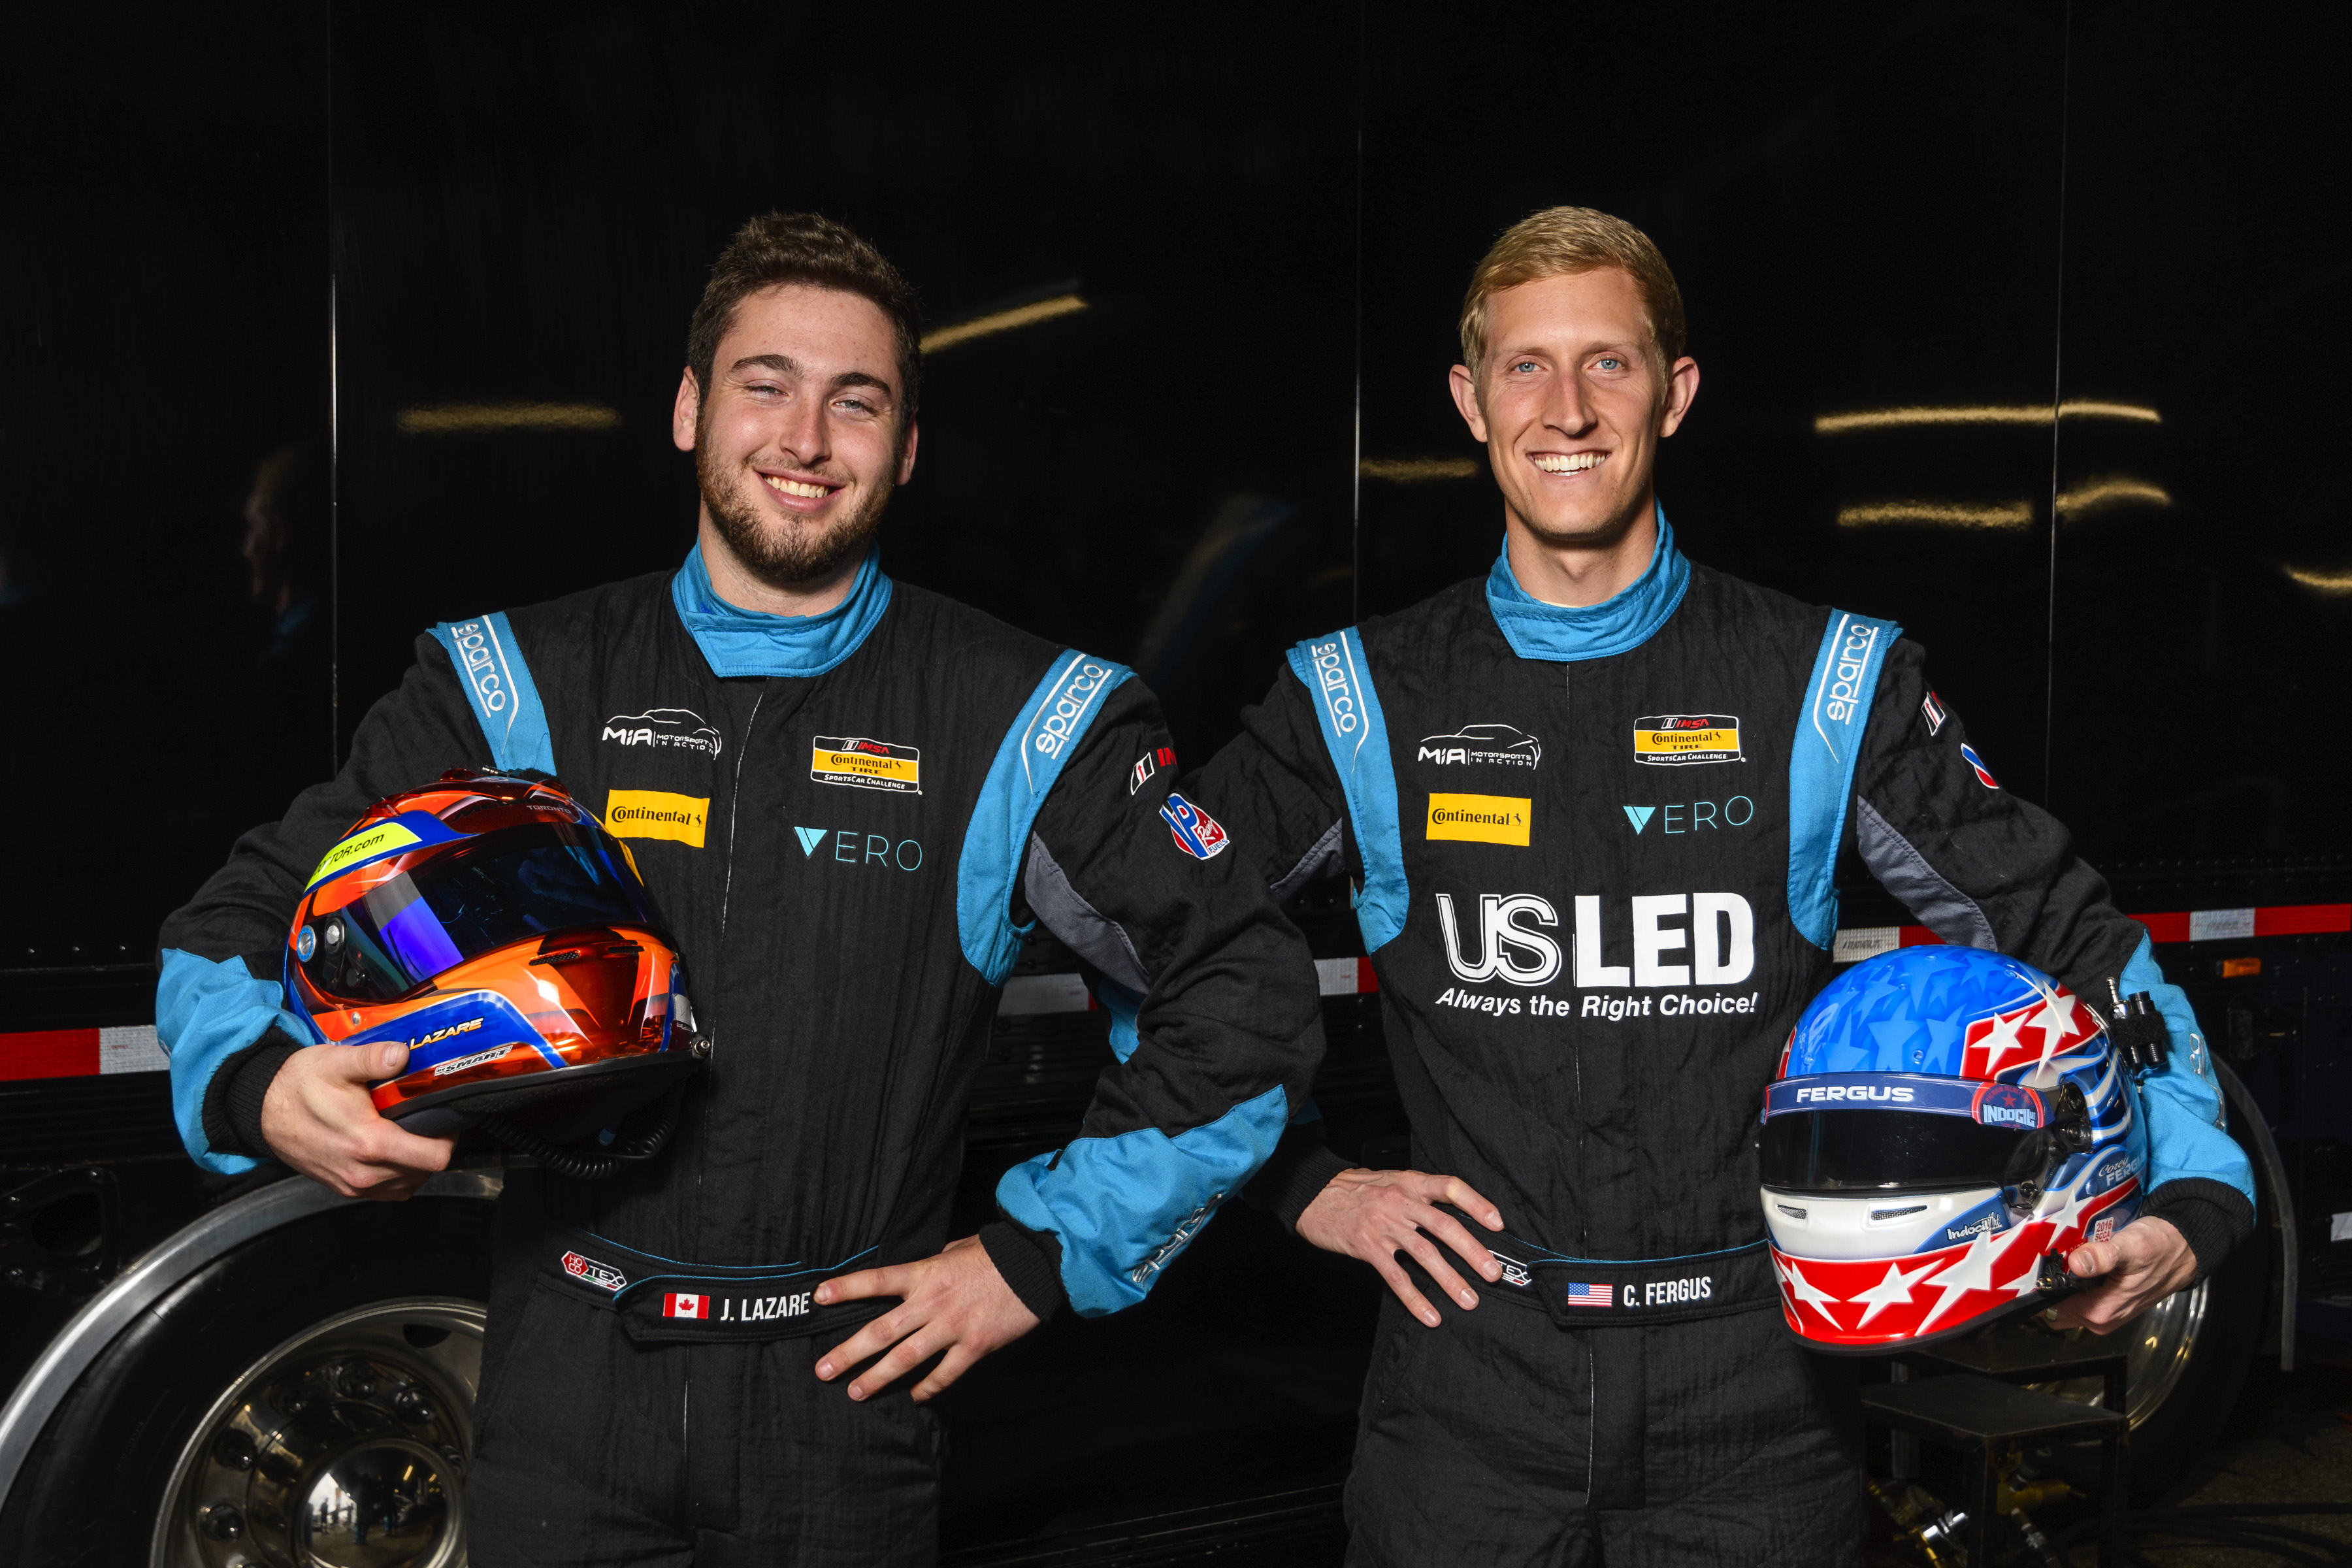 MOTORSPORTS IN ACTION RENEWS STRONG DRIVER LINE-UP FOR ITS 2019 IMSA MICHELIN PILOT CHALLENGE EFFORT